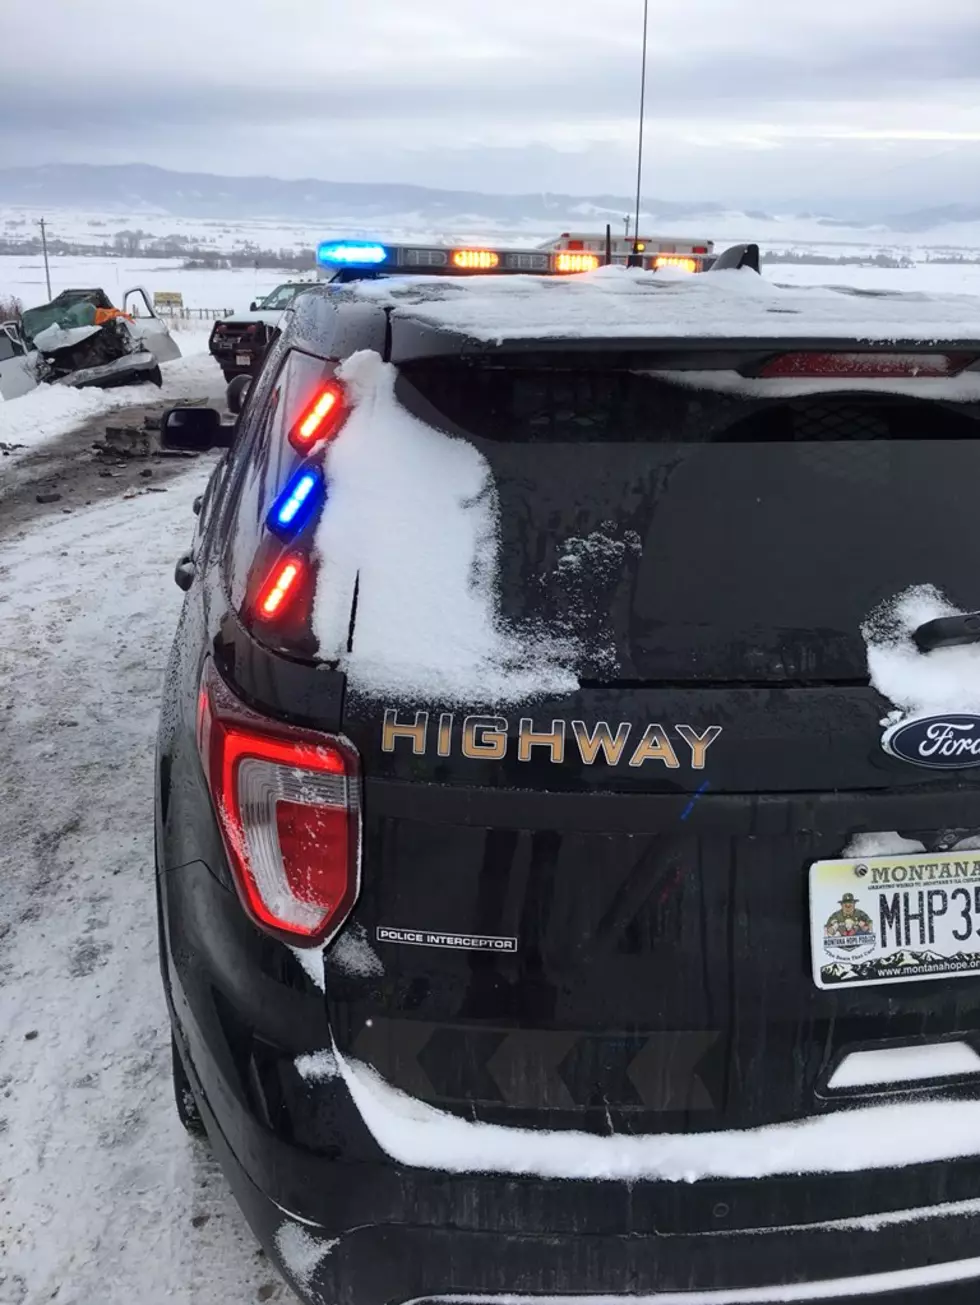 Update on Students Involved in Wednesday’s Highway 93 Crash